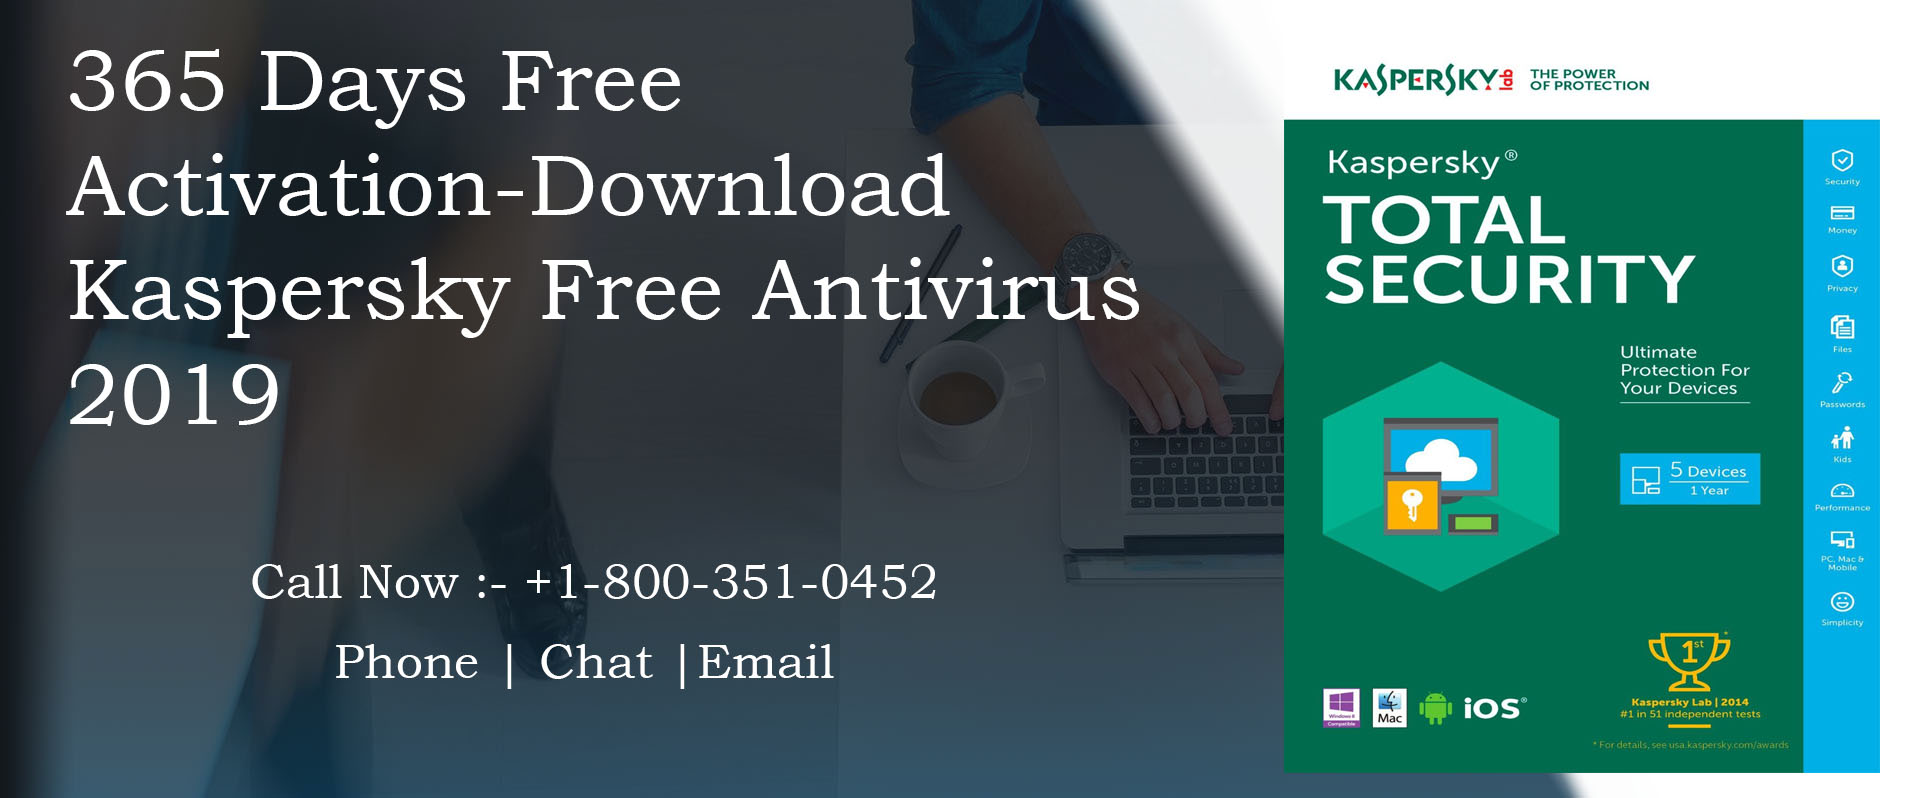 How to troubleshoot various Kaspersky Antivirus issues?